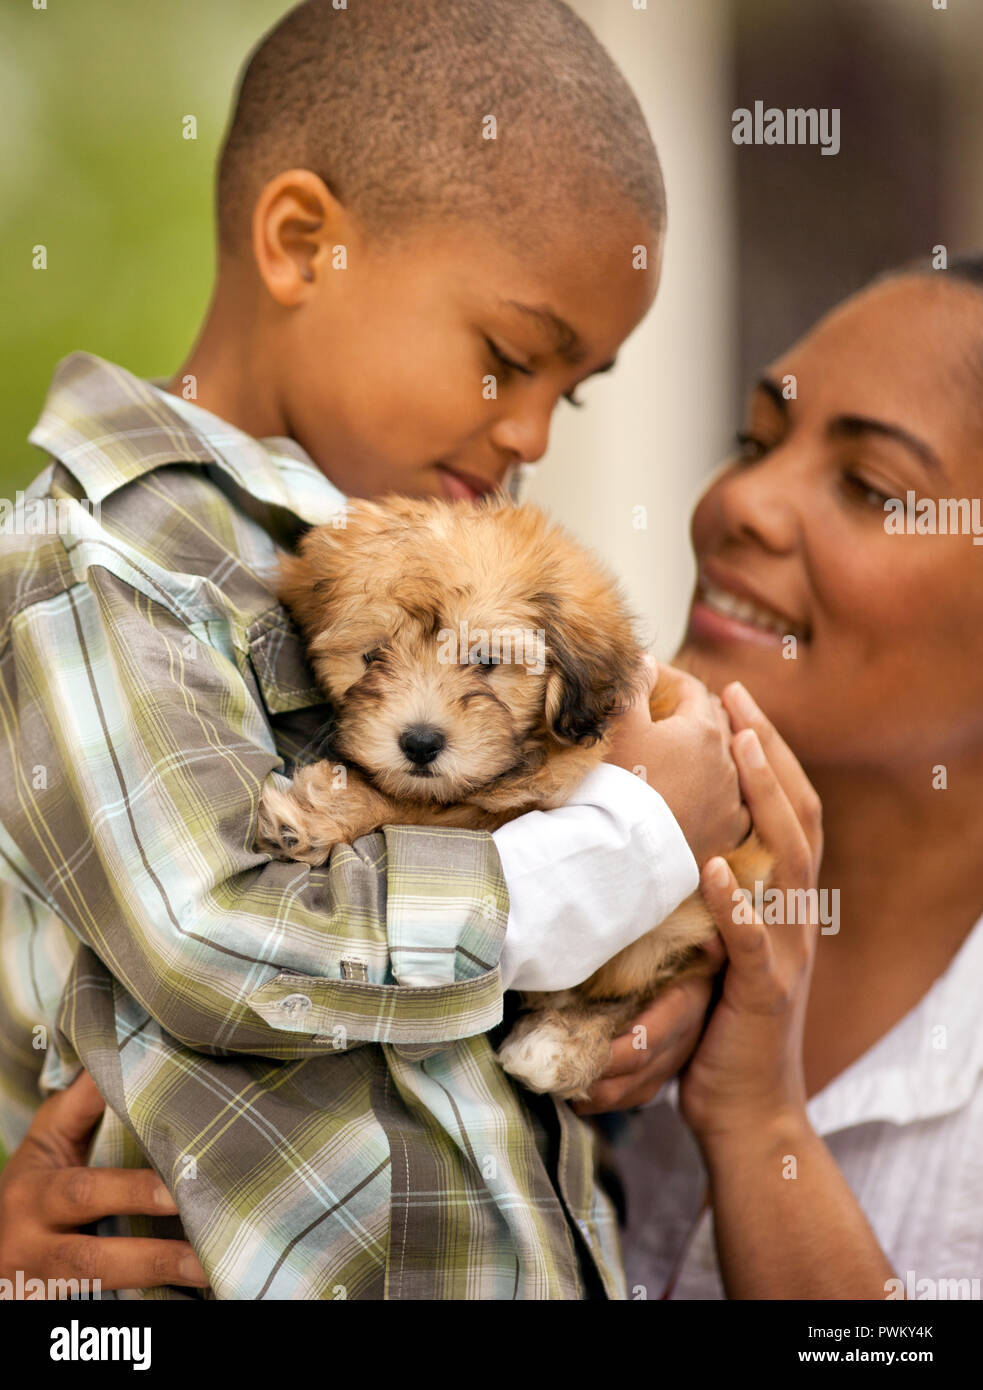 Young boy holding a puppy. Stock Photo